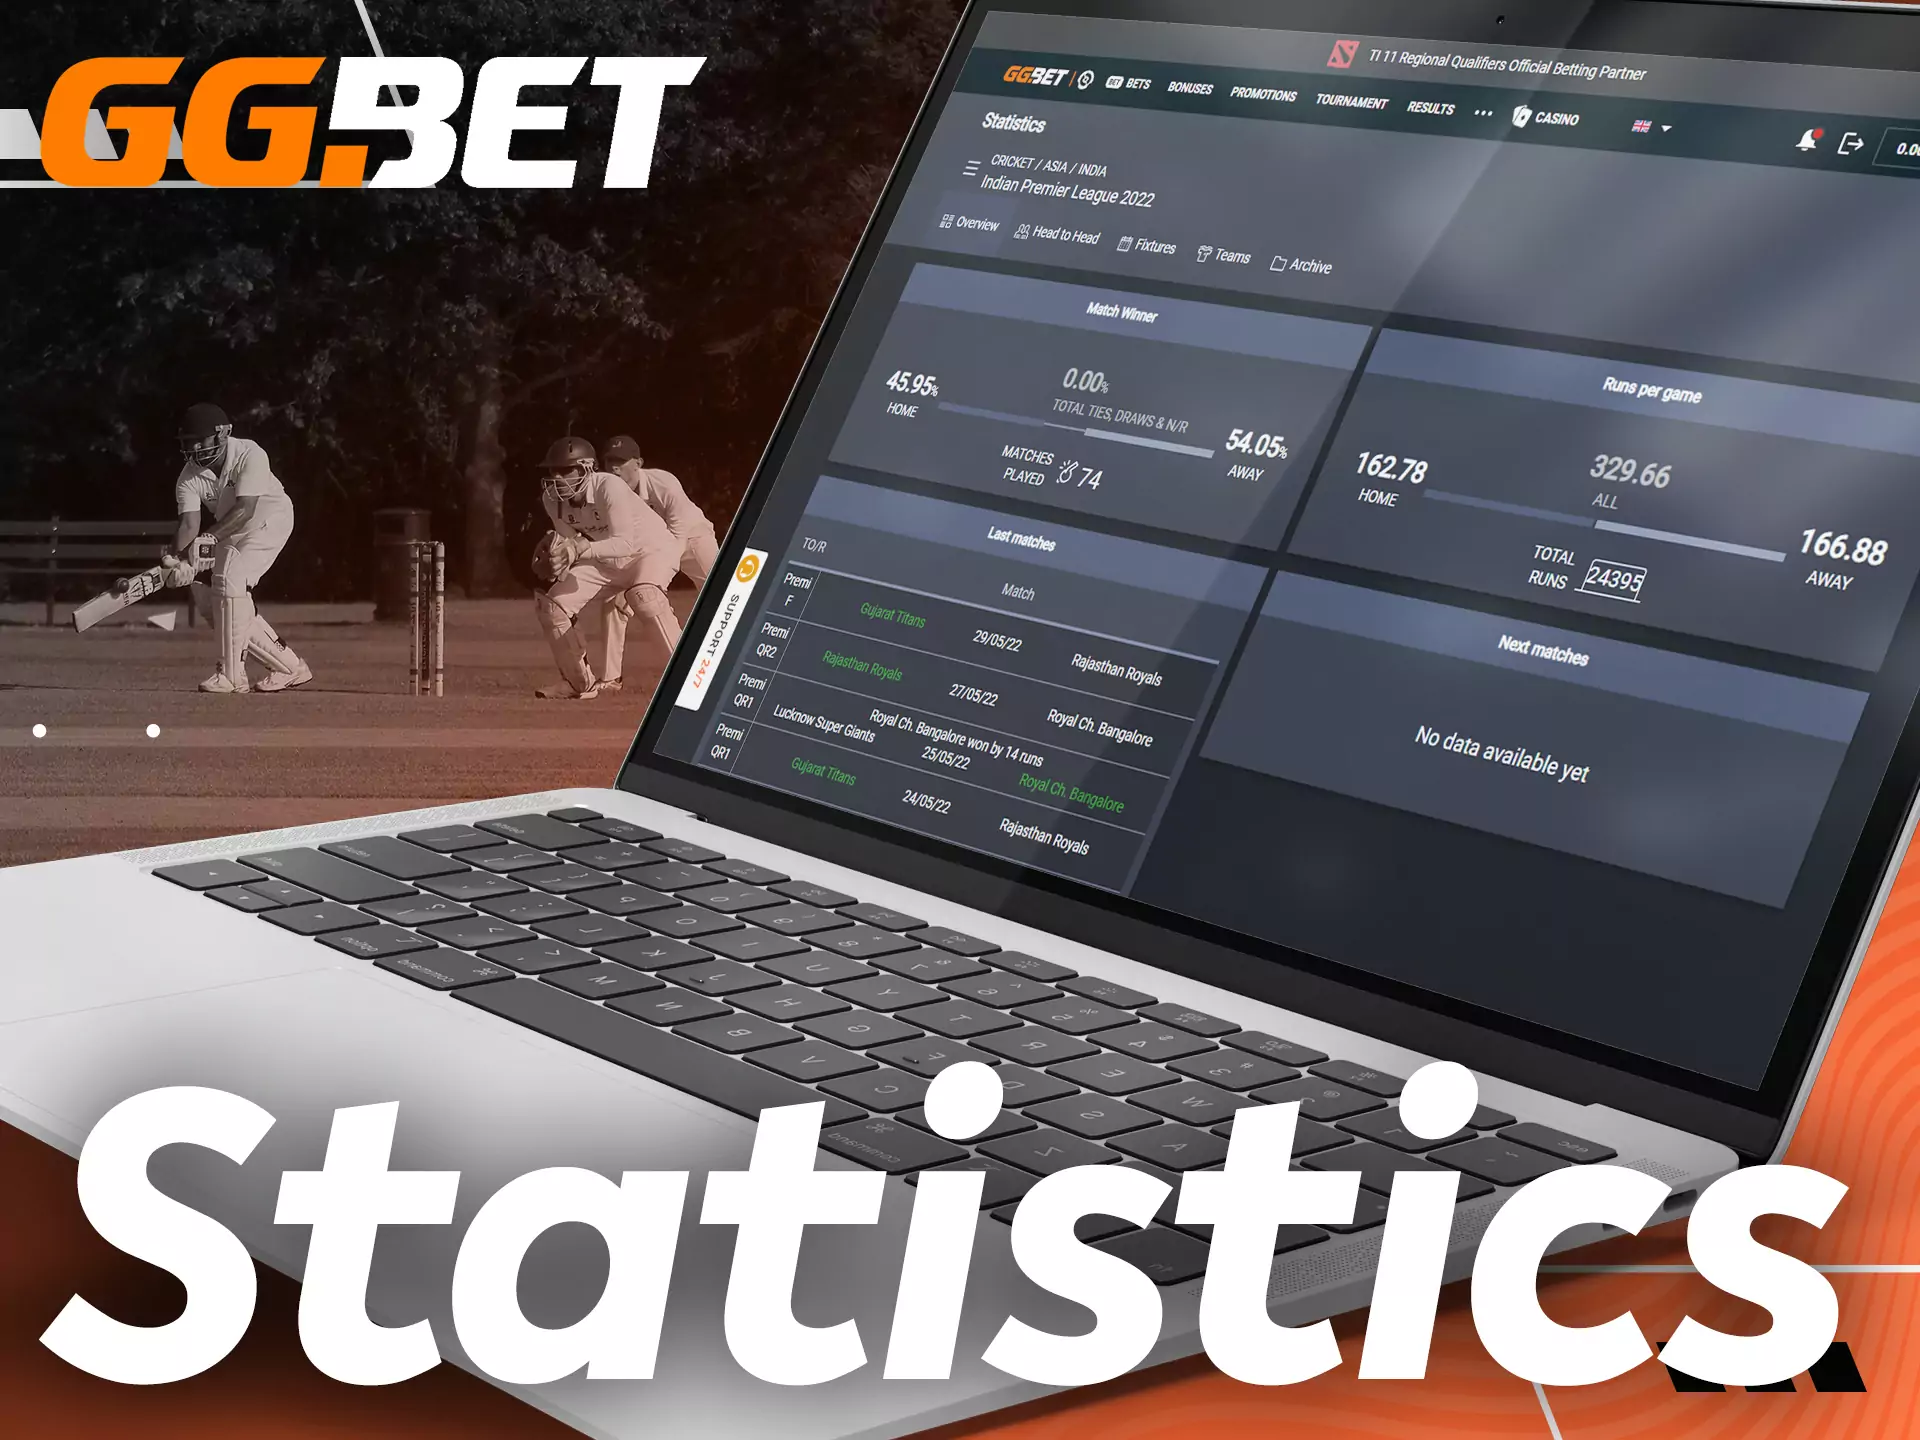 Check the results of matches in the GGBet statistics section.